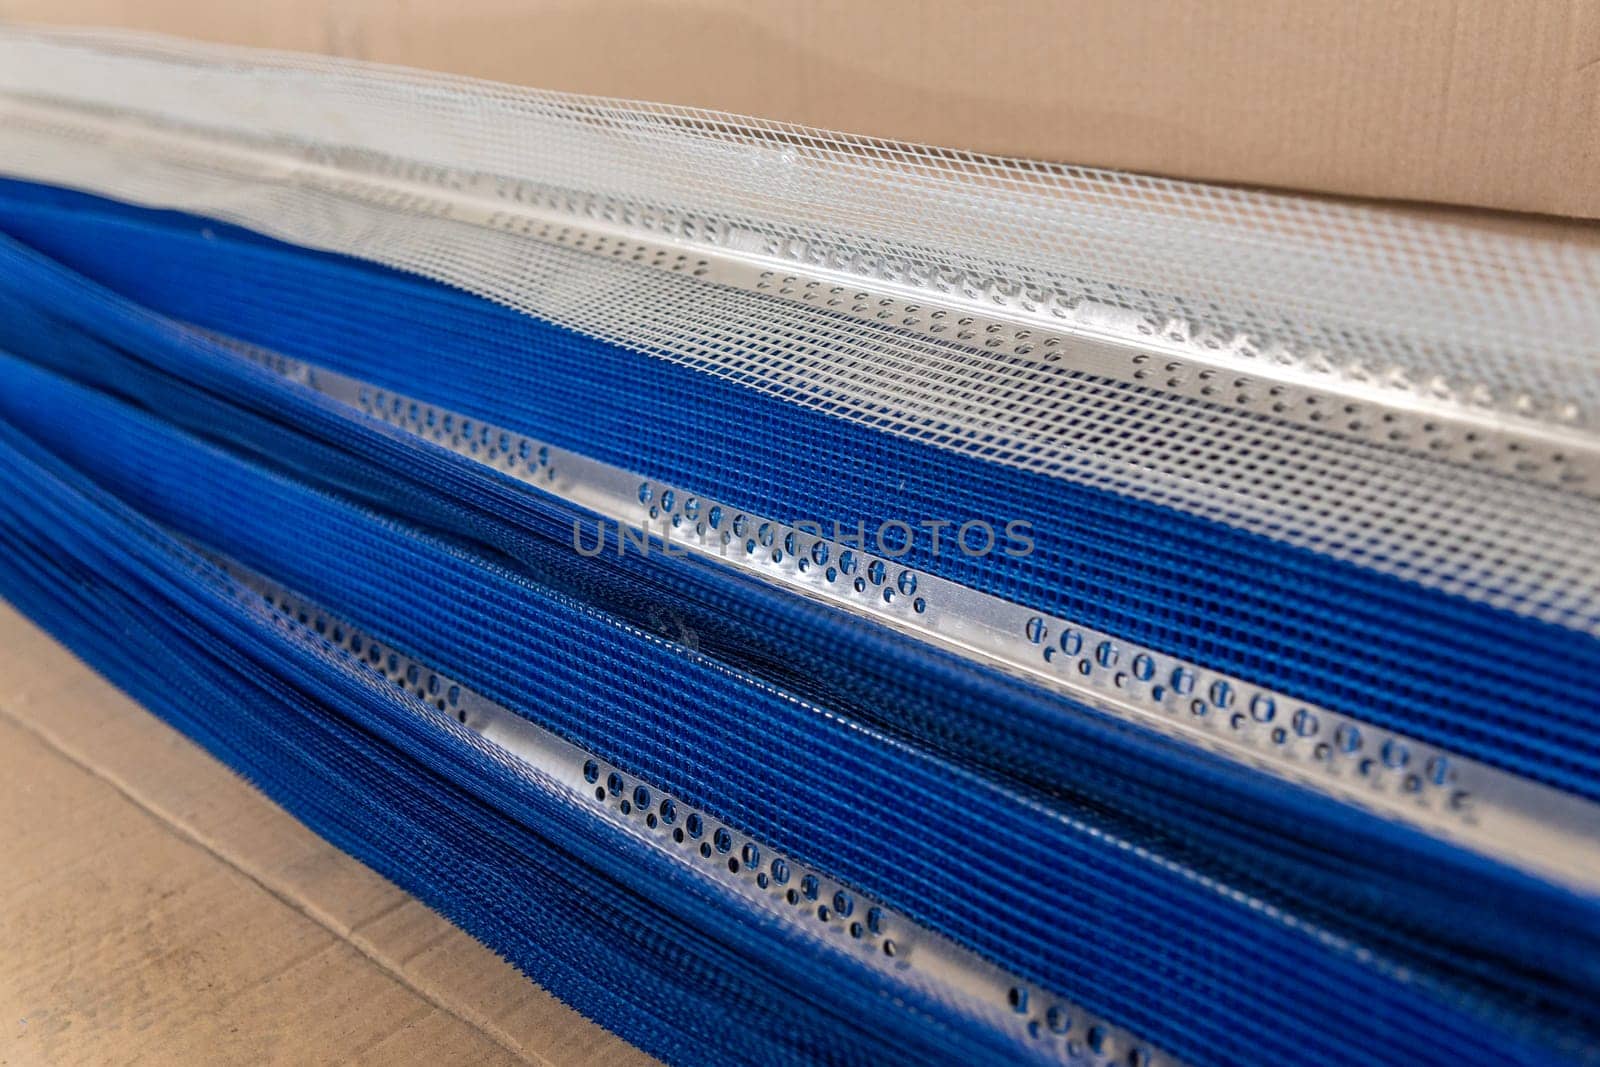 Aluminum perforated corner beads with PVC grid in construction materials market